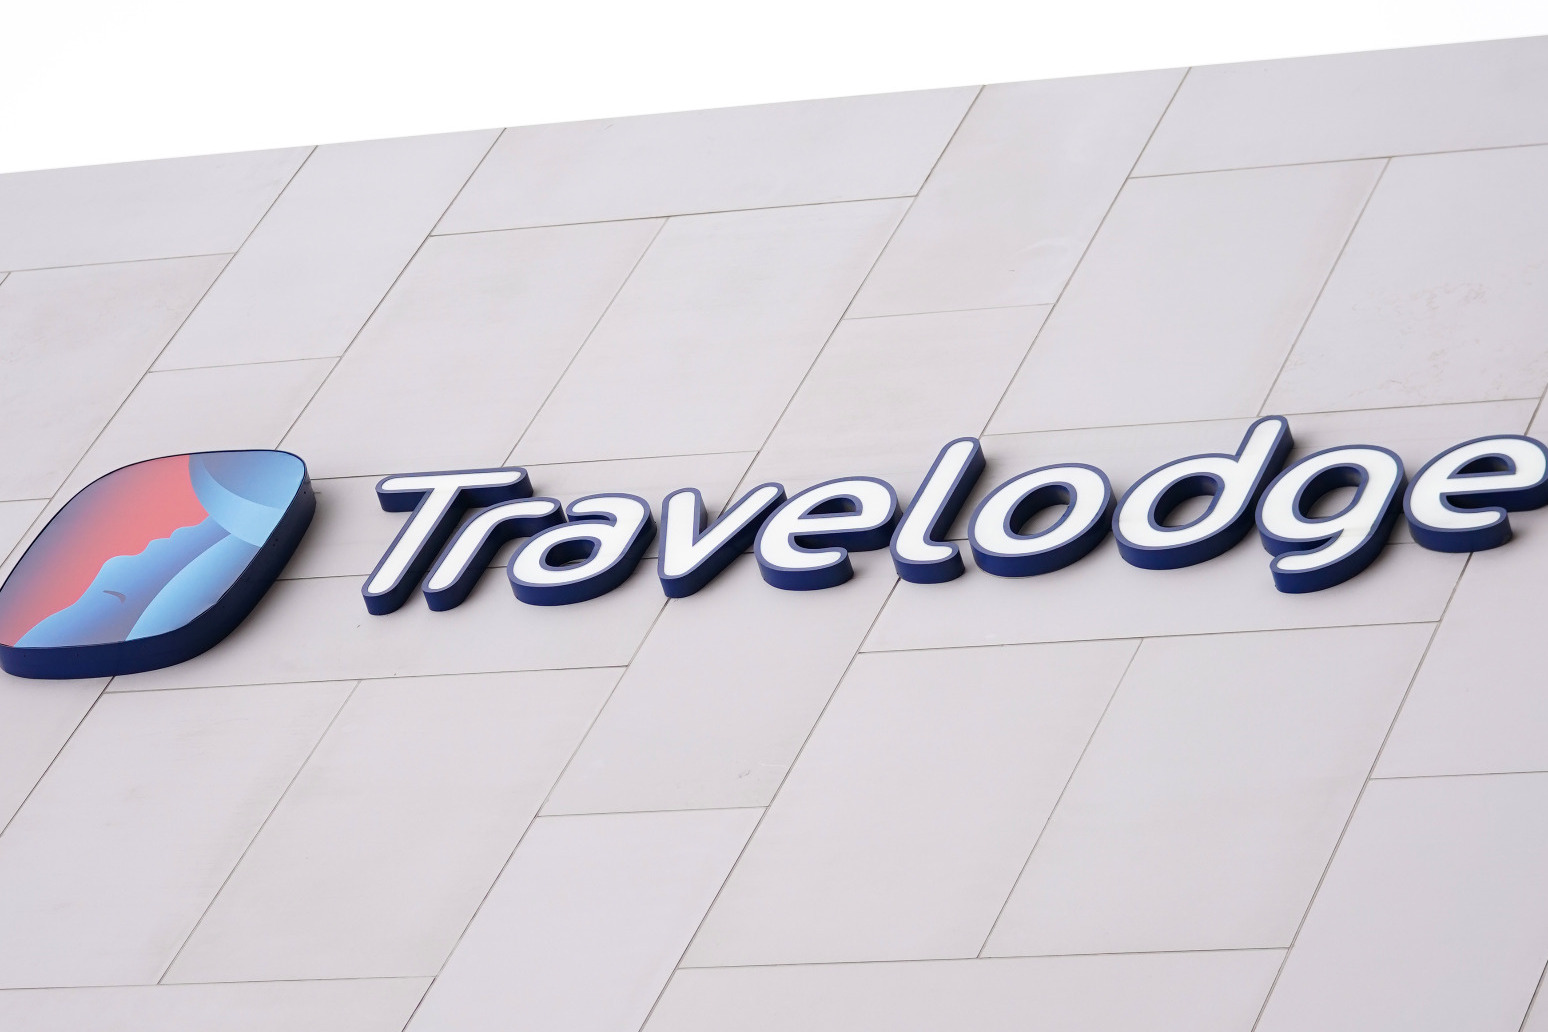 Travelodge moots development links with councils amid plans for 300 new hotels 